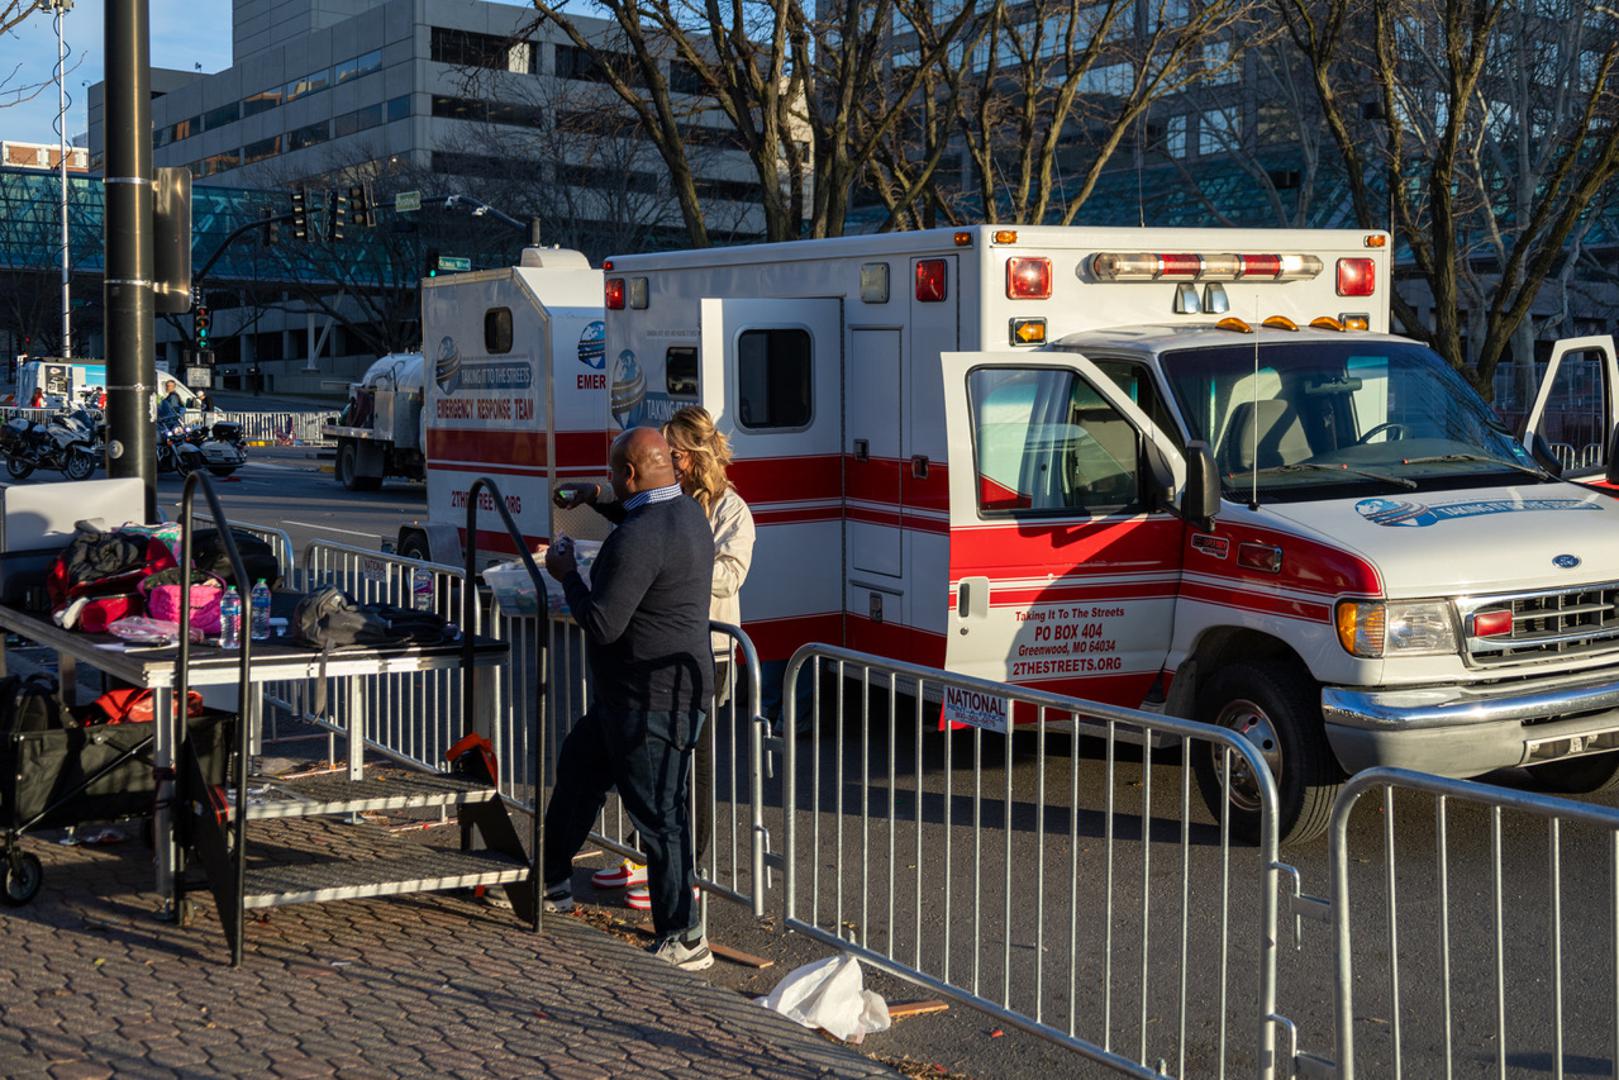 (240215) -- KANSAS CITY, Feb. 15, 2024 (Xinhua) -- This photo taken on Feb. 14, 2024 shows an ambulance waiting at the site following a shooting in Kansas City, Missouri, the United States. At least one person was killed and 22 were injured as gunfire erupted during the Kansas City Chiefs' Super Bowl victory parade in Kansas City, U.S. state of Missouri, Stacey Graves, chief of the Kansas City Missouri Police Department, said at a news conference on Wednesday afternoon. (Photo by Robert Reed/Xinhua) Photo: Robert Reed/XINHUA